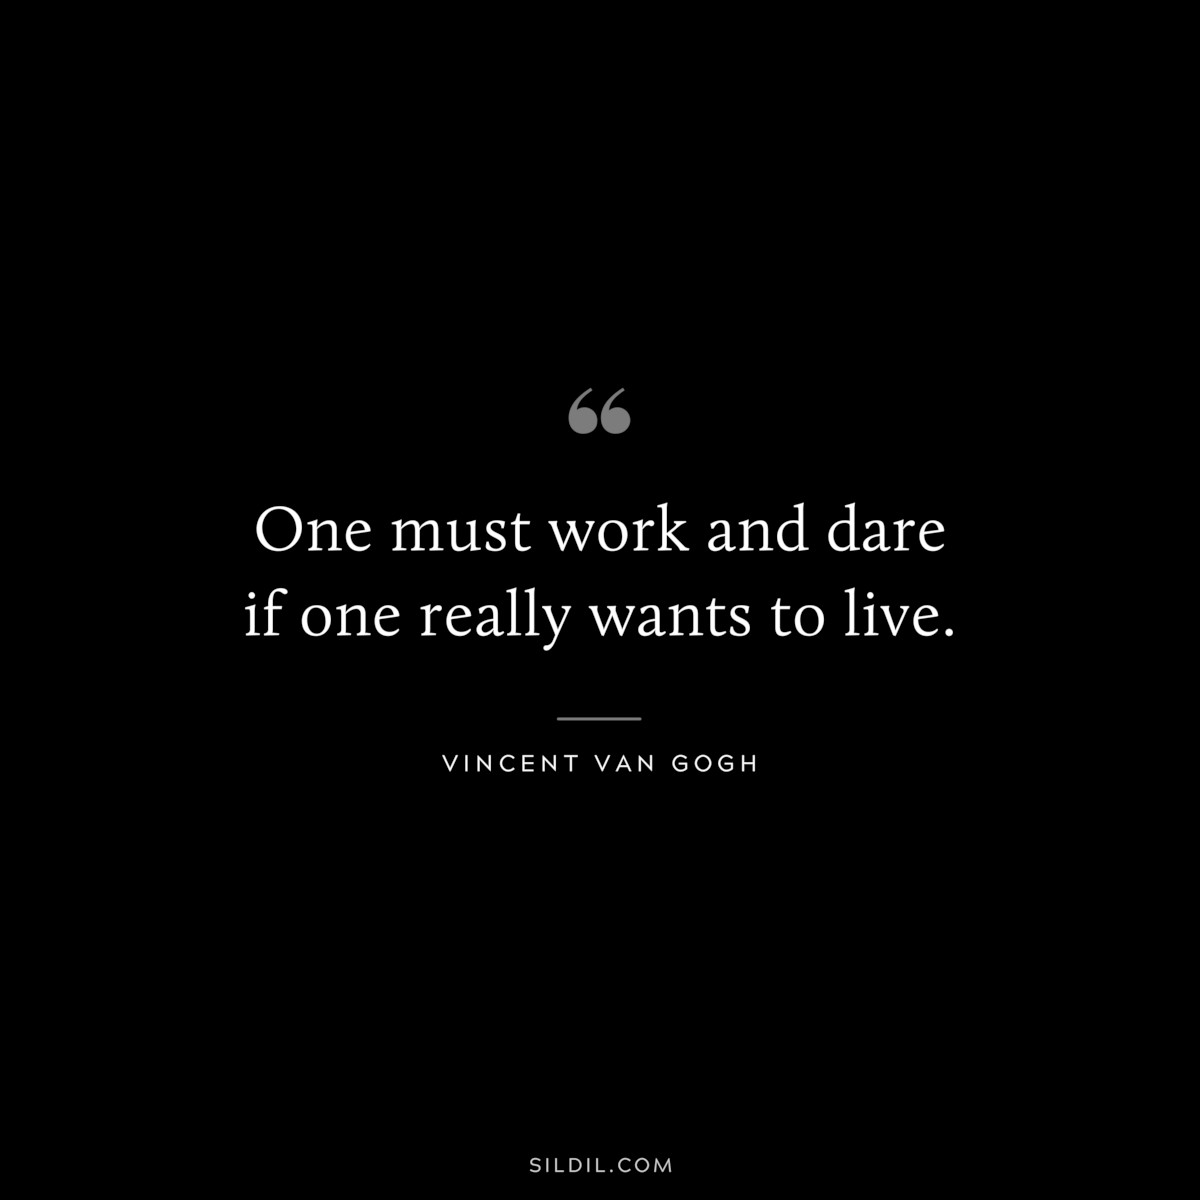 One must work and dare if one really wants to live. ― Vincent van Gogh